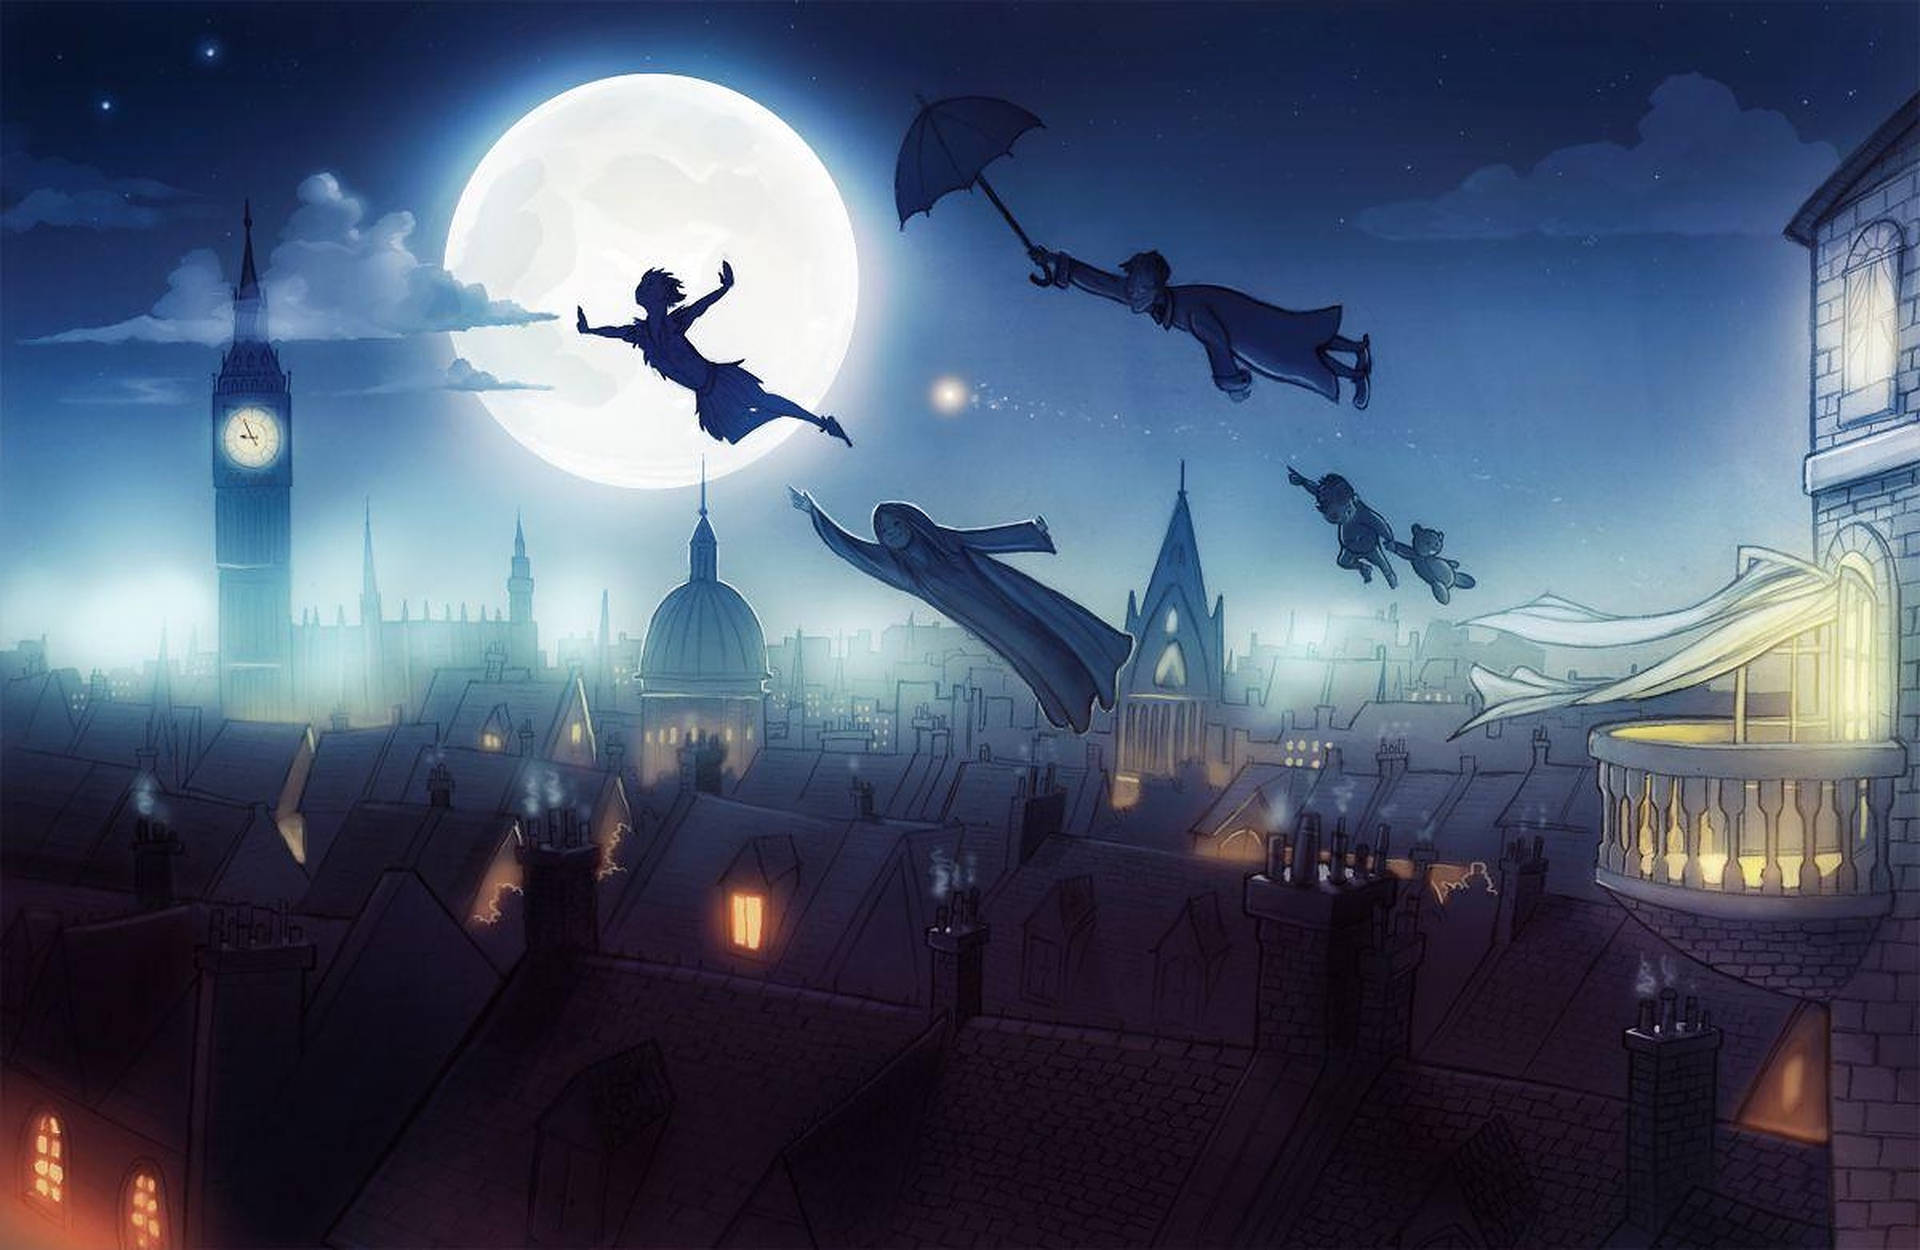 Peter Pan Flying To Neverland